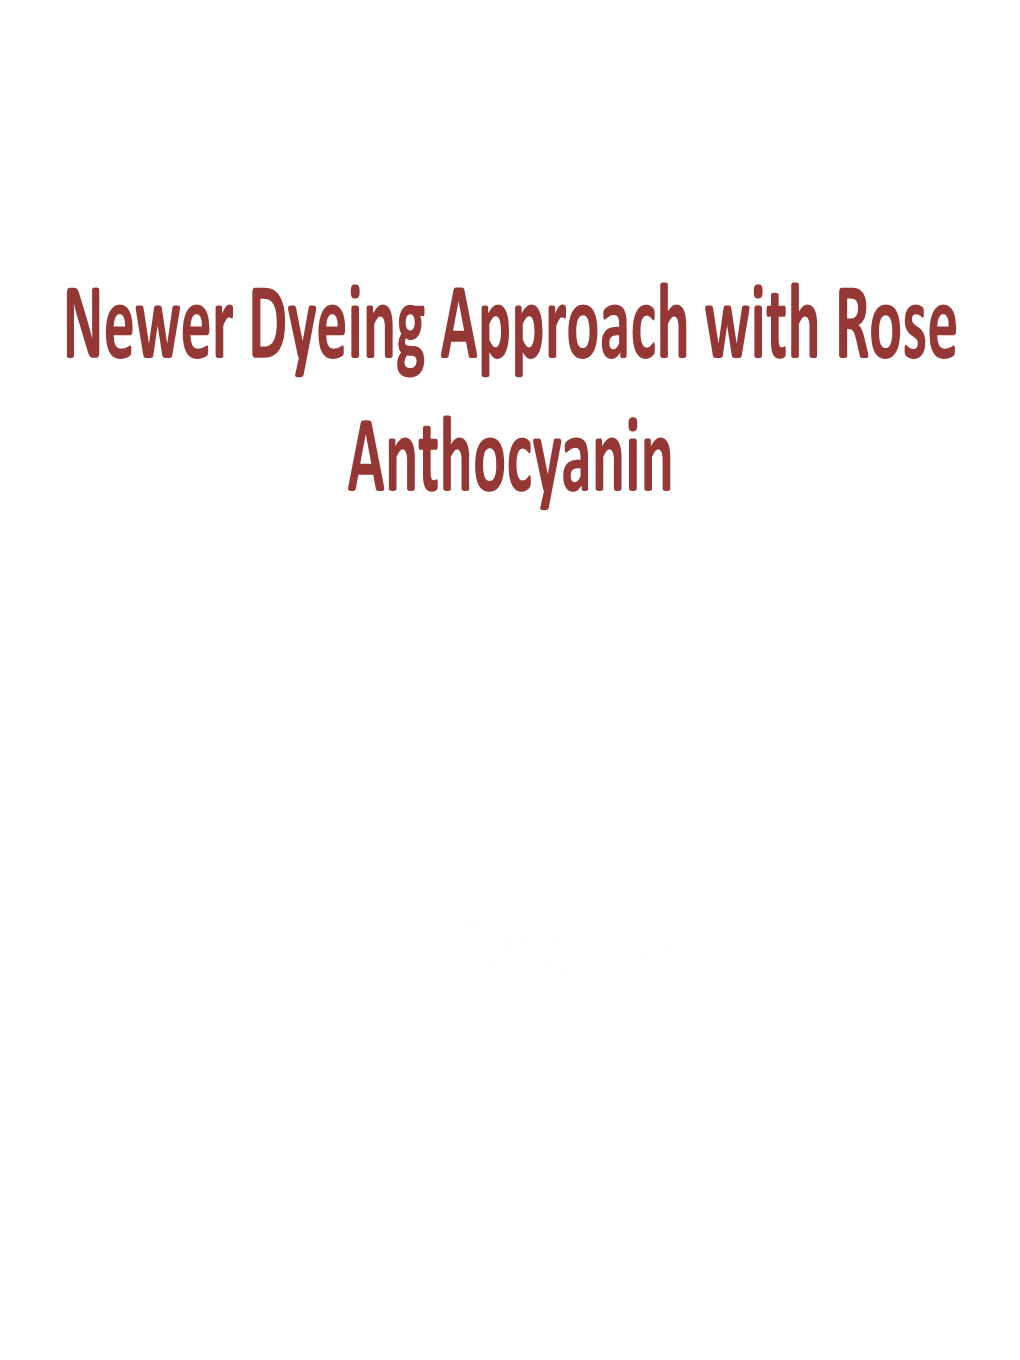 Newer Dyeing Approach with Rose Anthocyanin